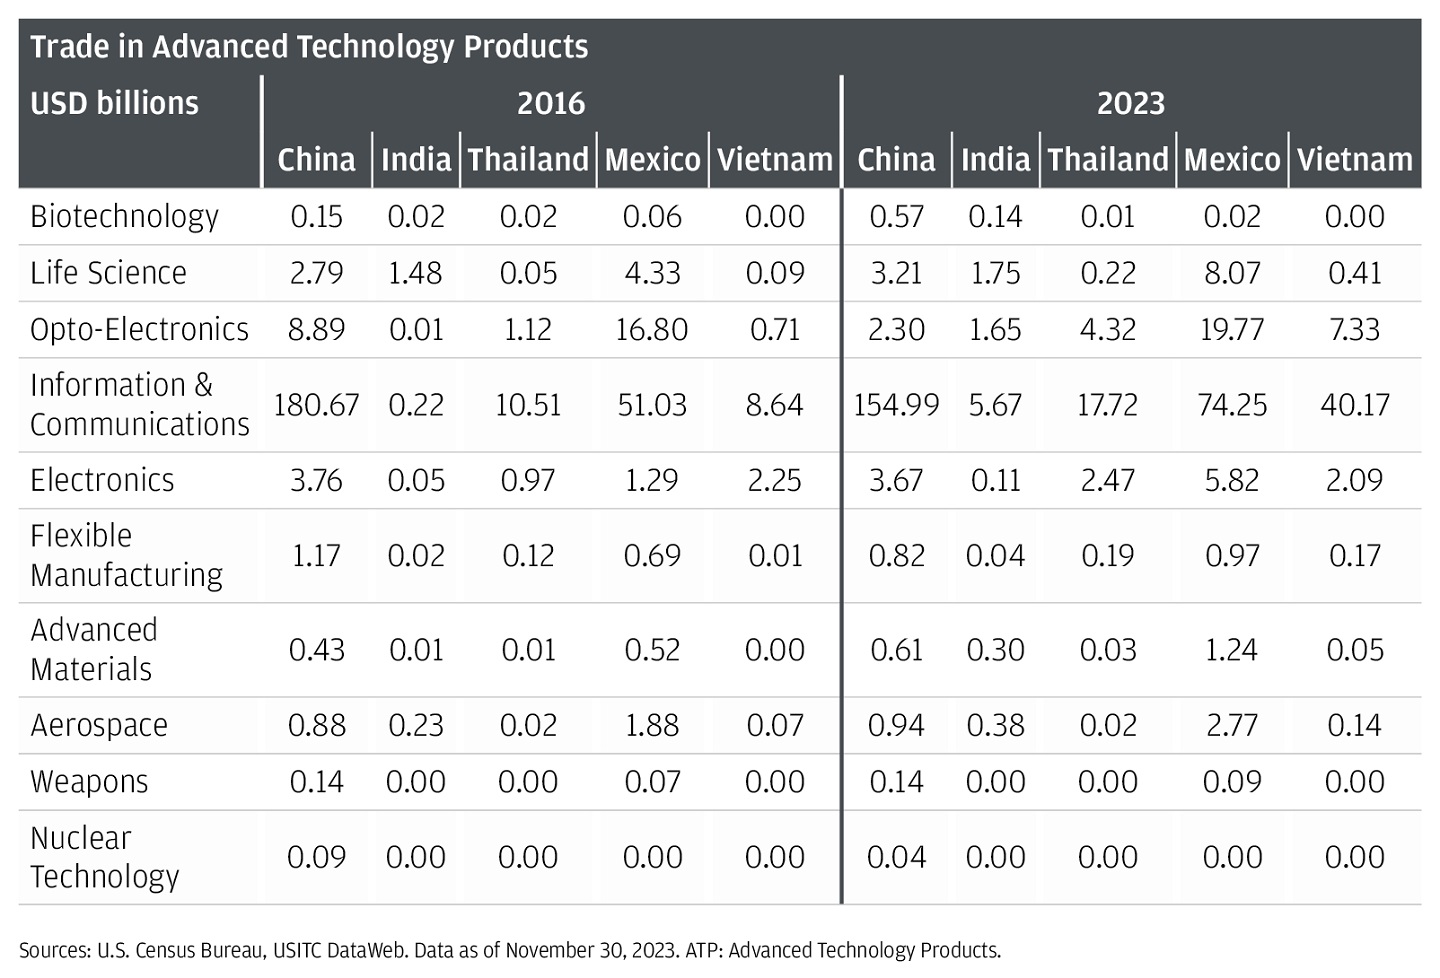 This table describes the trade of U.S. imports of Advanced Technology Products by country (China, India, Thailand, Mexico, Vietnam) in 2016 and 2023.